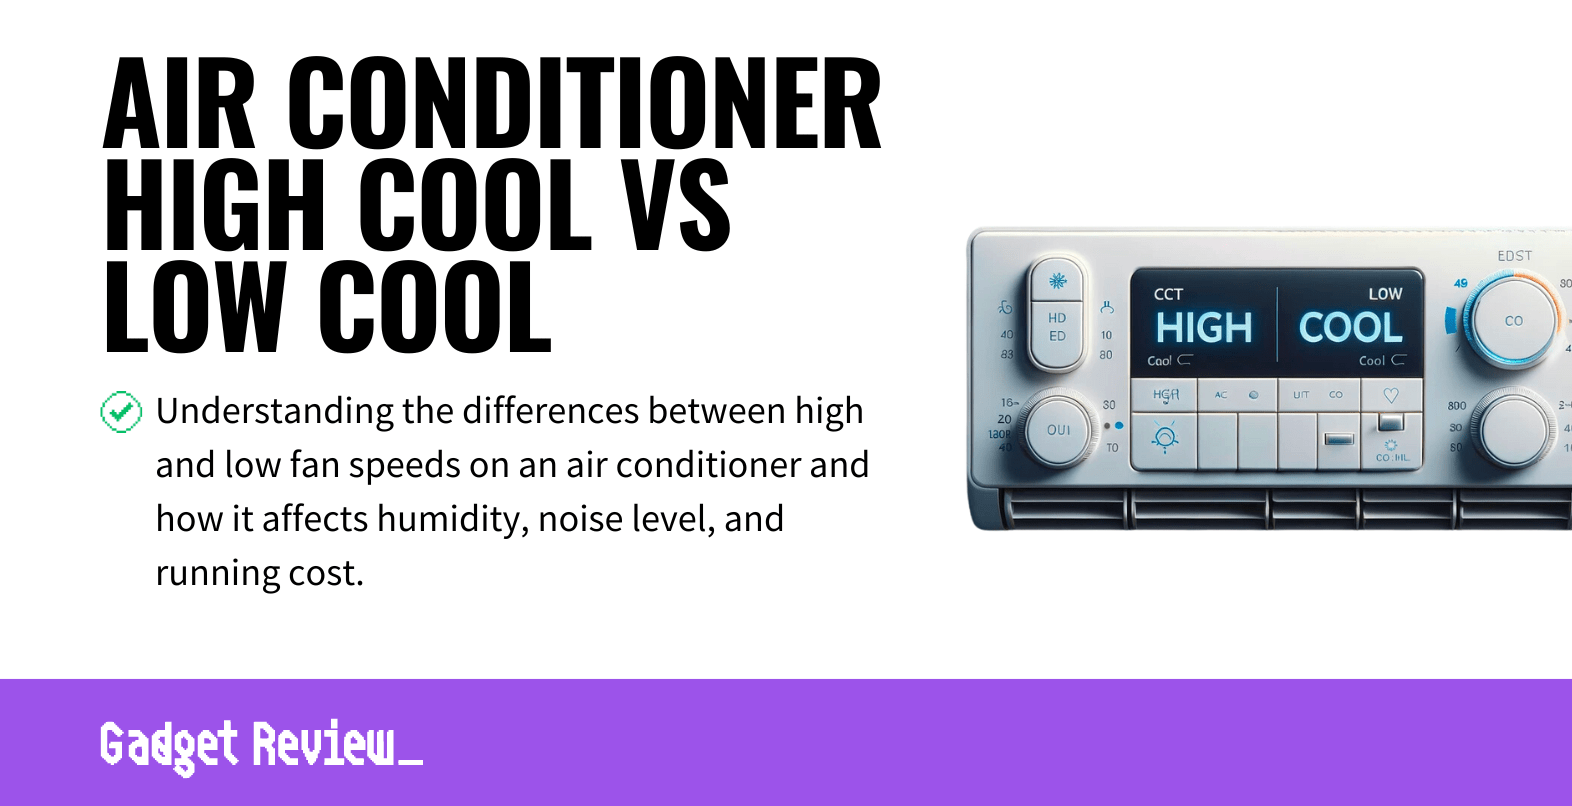 Air Conditioner High Cool vs Low Cool